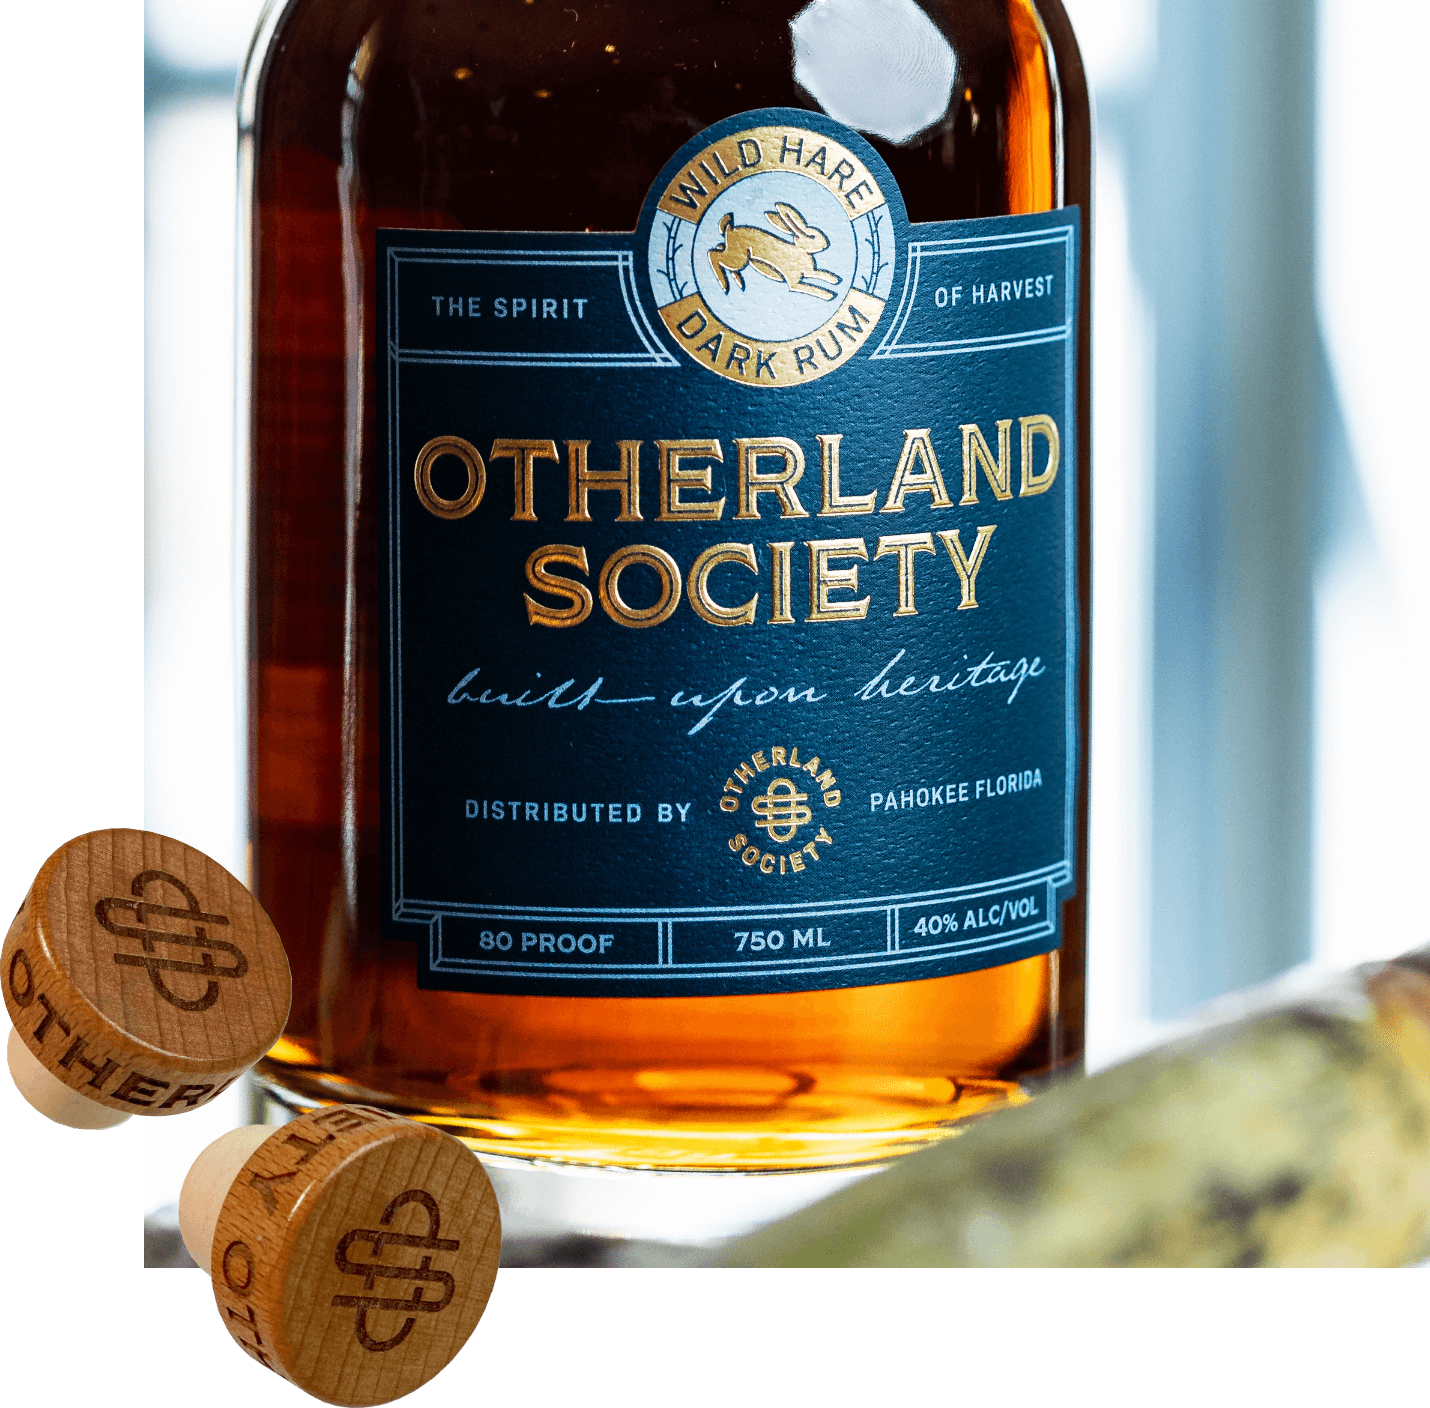 Otherland Society rum bottle packaging detail shot with engrave bottle caps